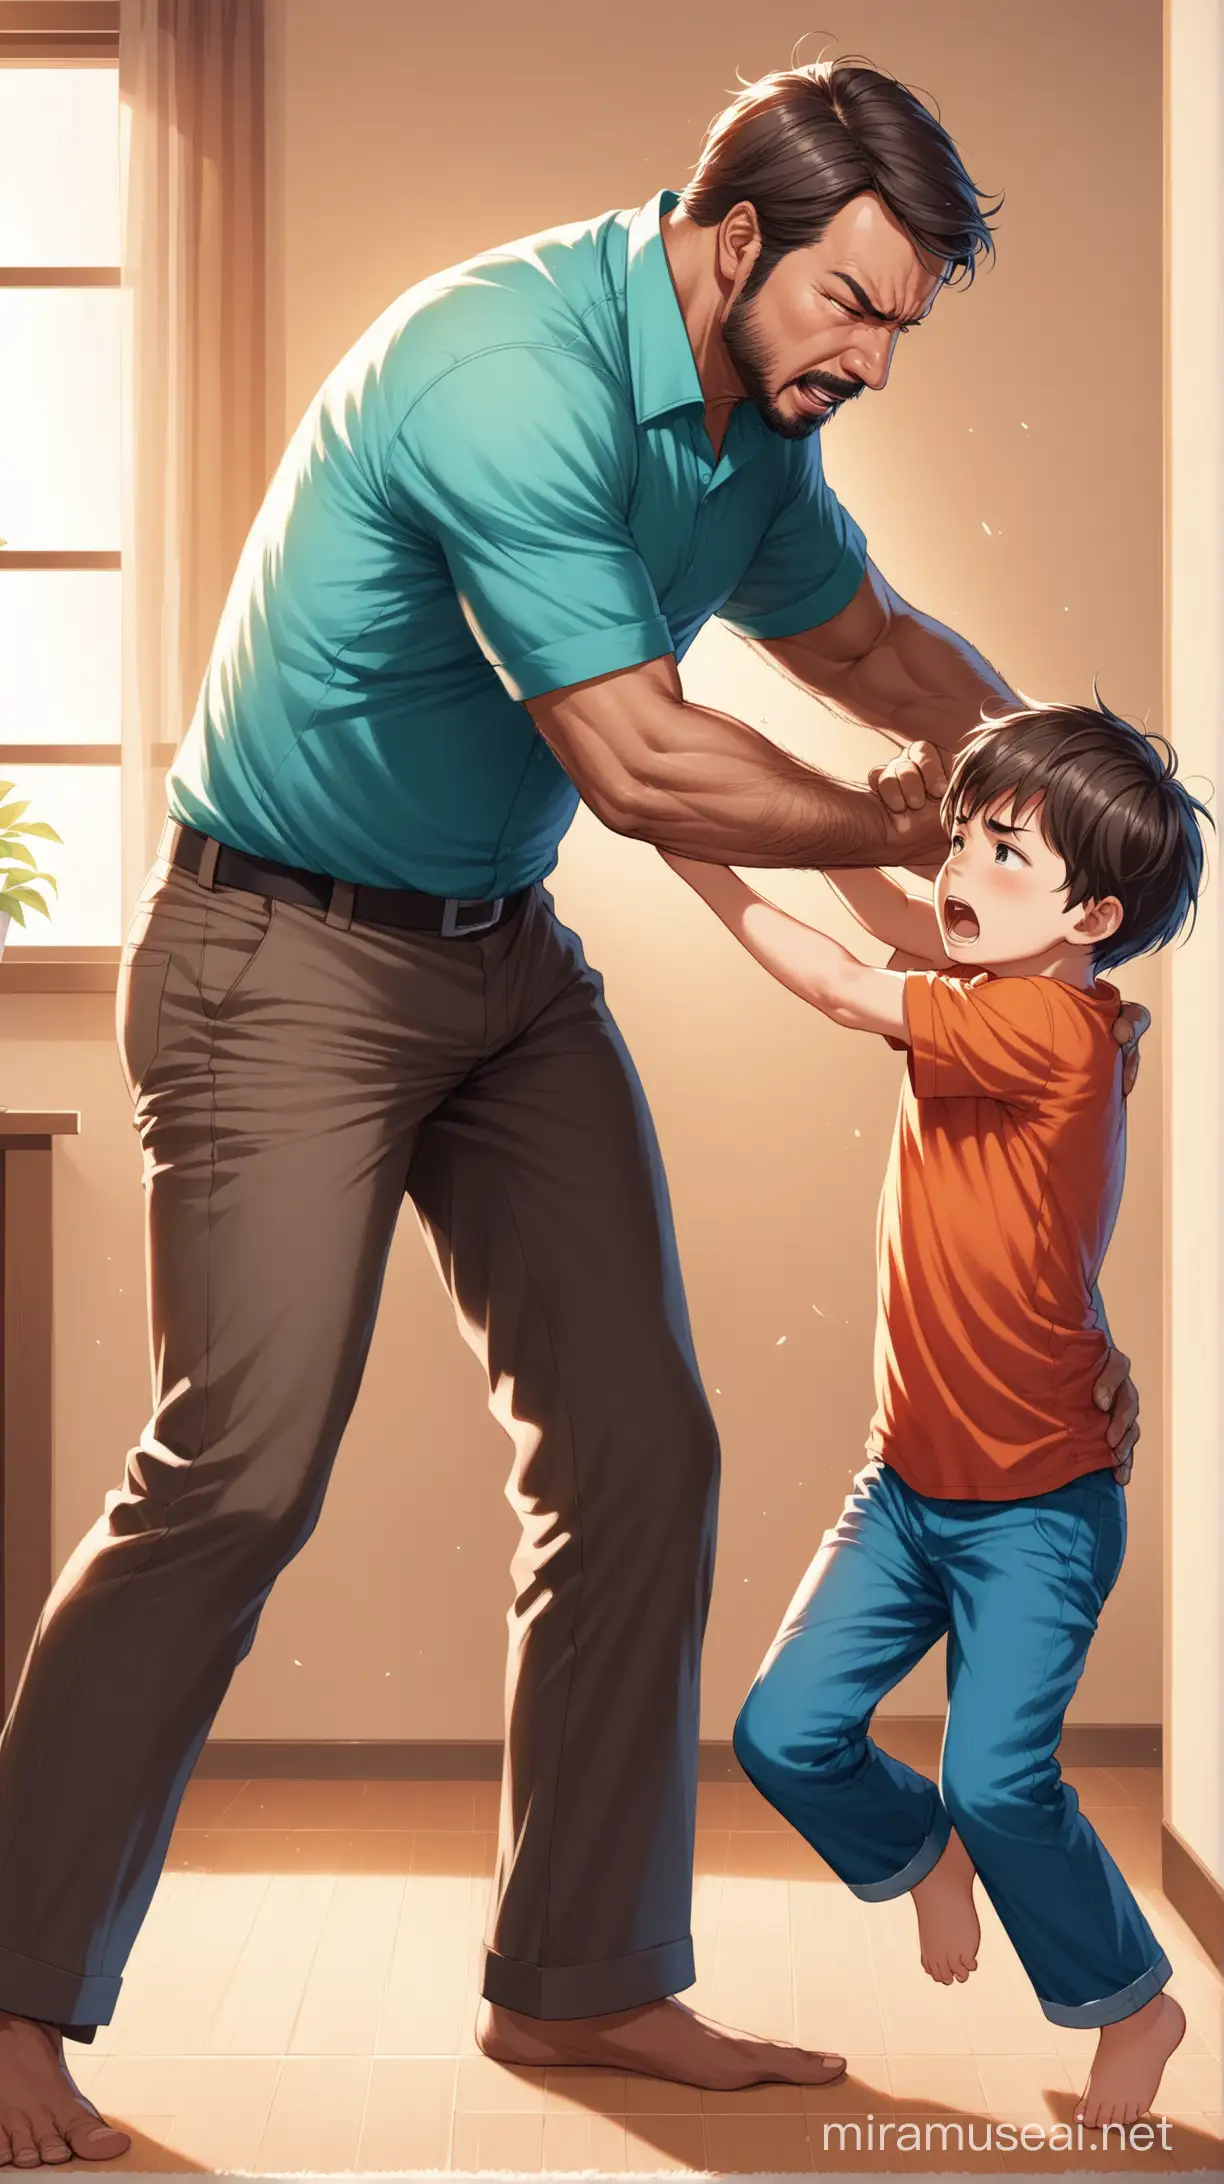 Domestic Discipline Father Disciplining Son at Home